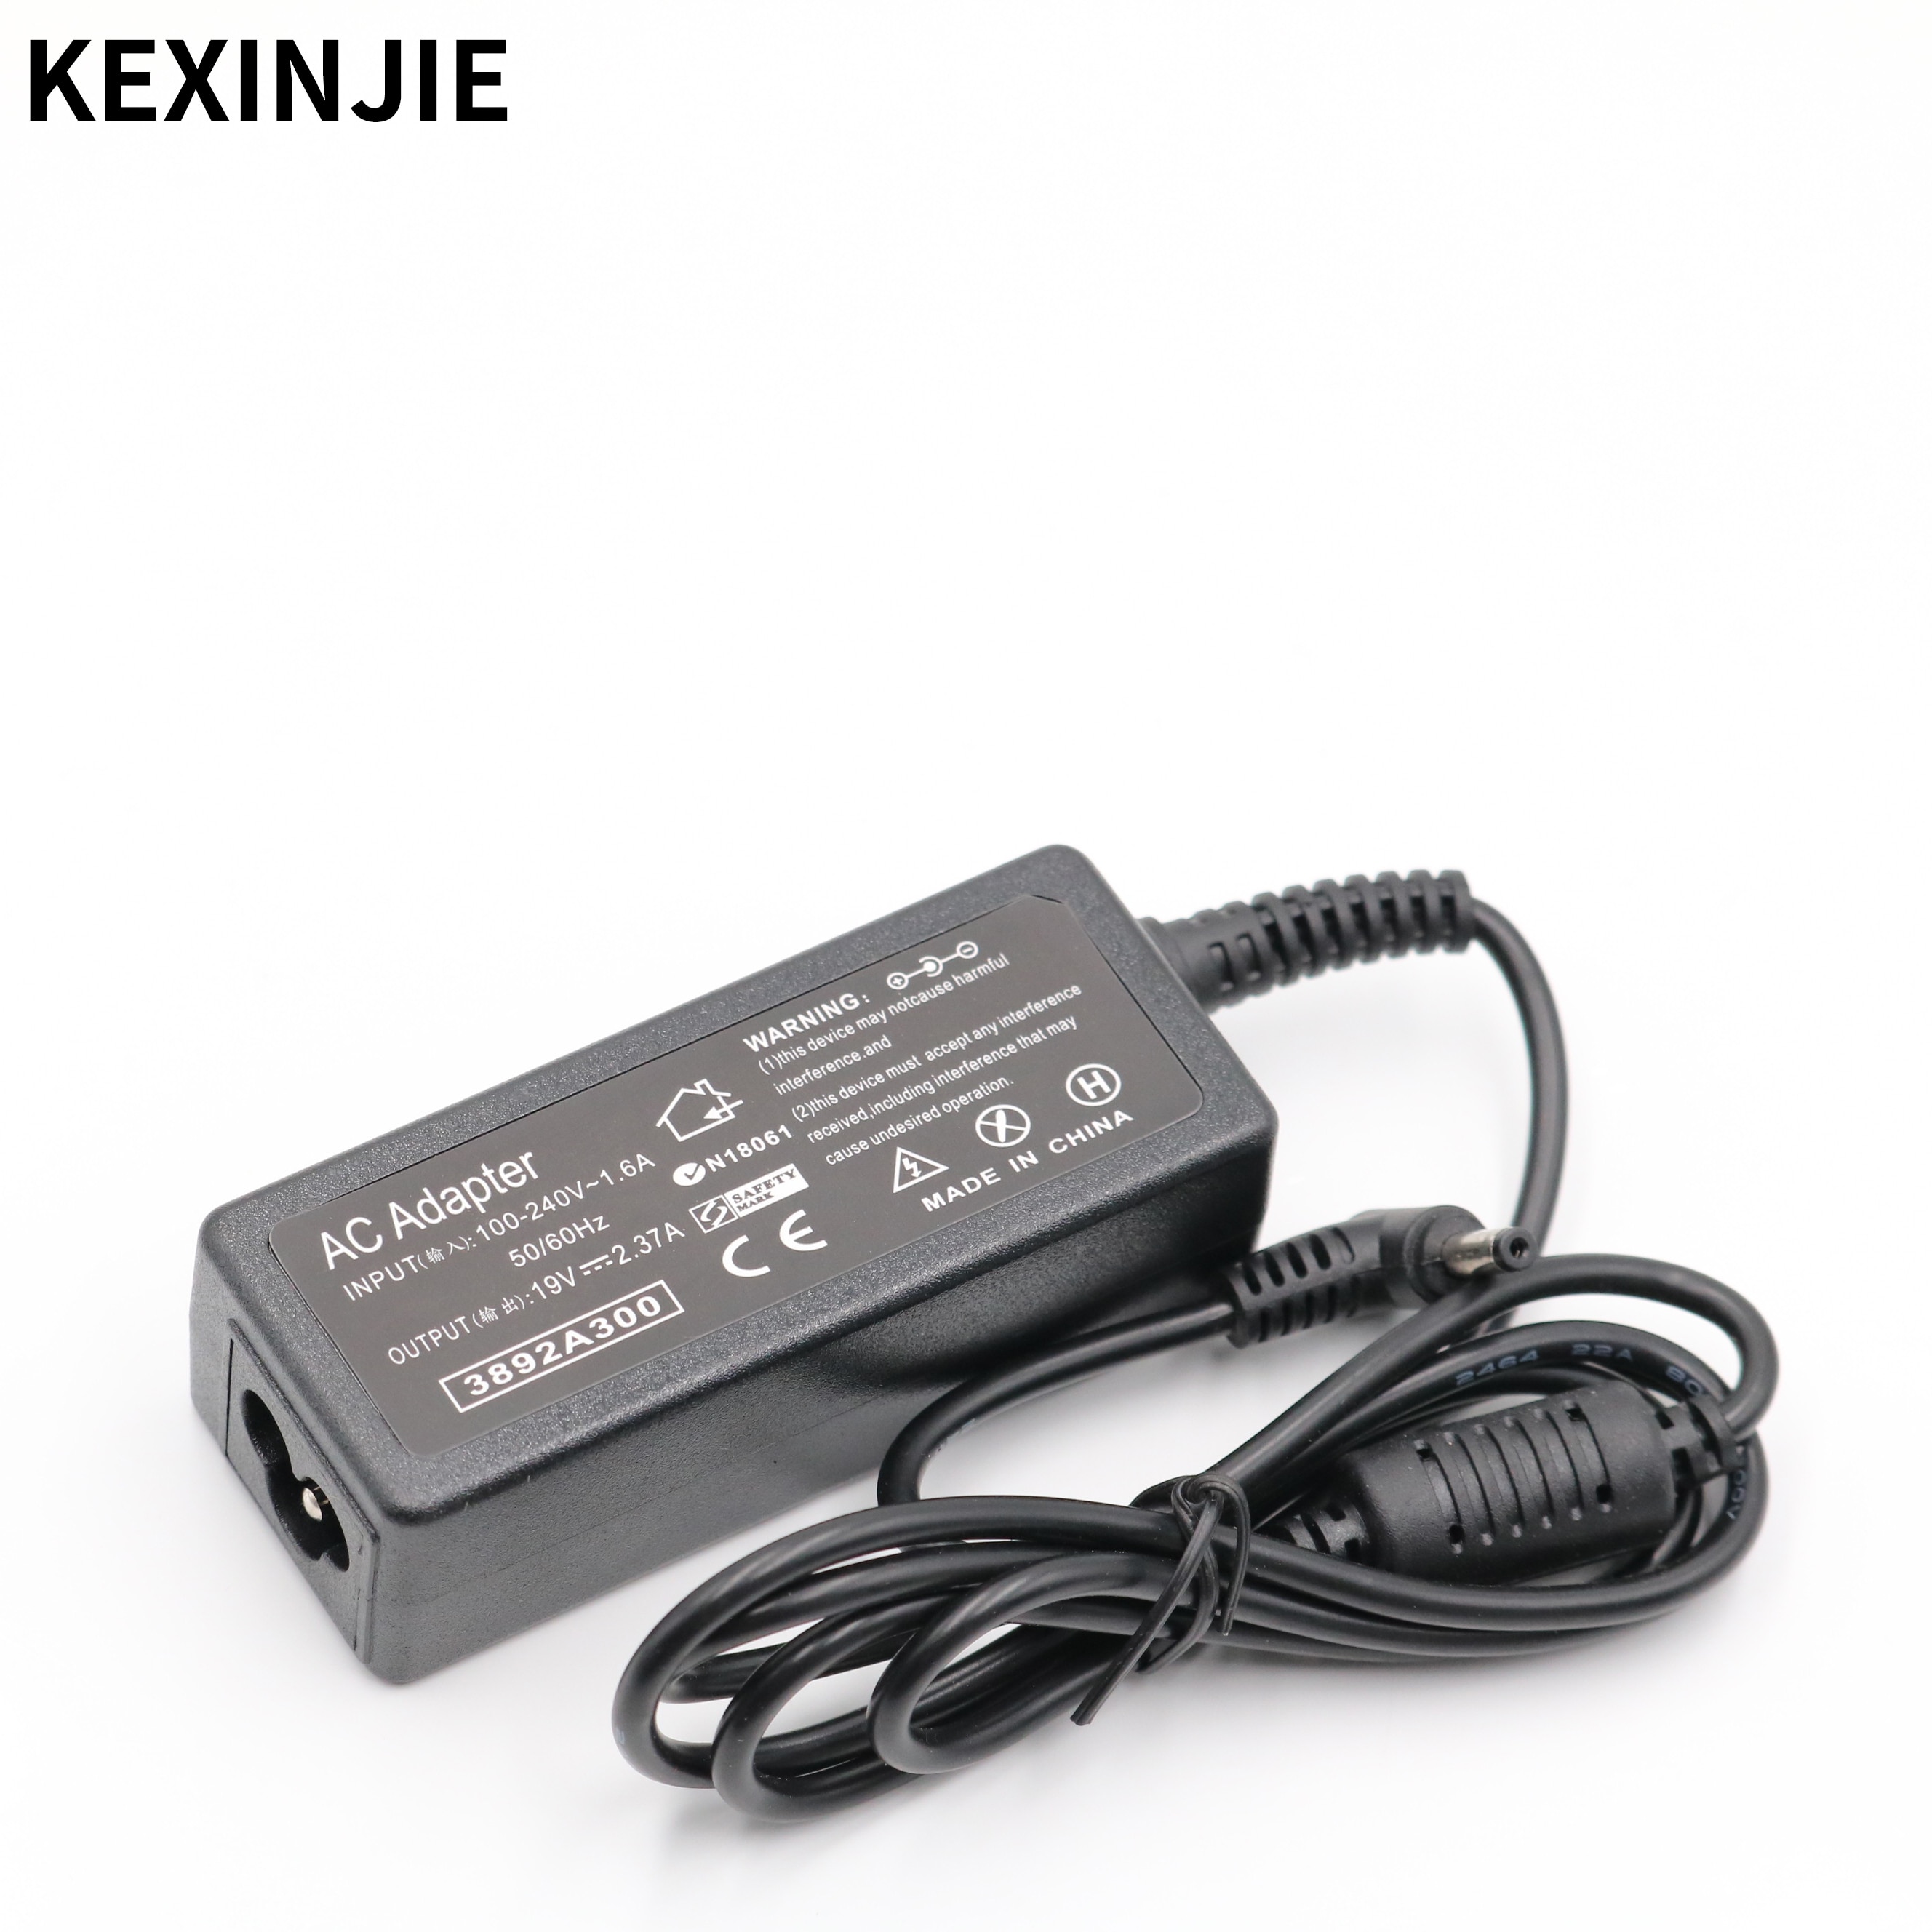 19V 2.37A 45W 4.0X1.35Mm Laptop Ac Adapter Voeding Lader Vervanging Voor Asus X540SA X540S x540L X540LA X541UA X556U